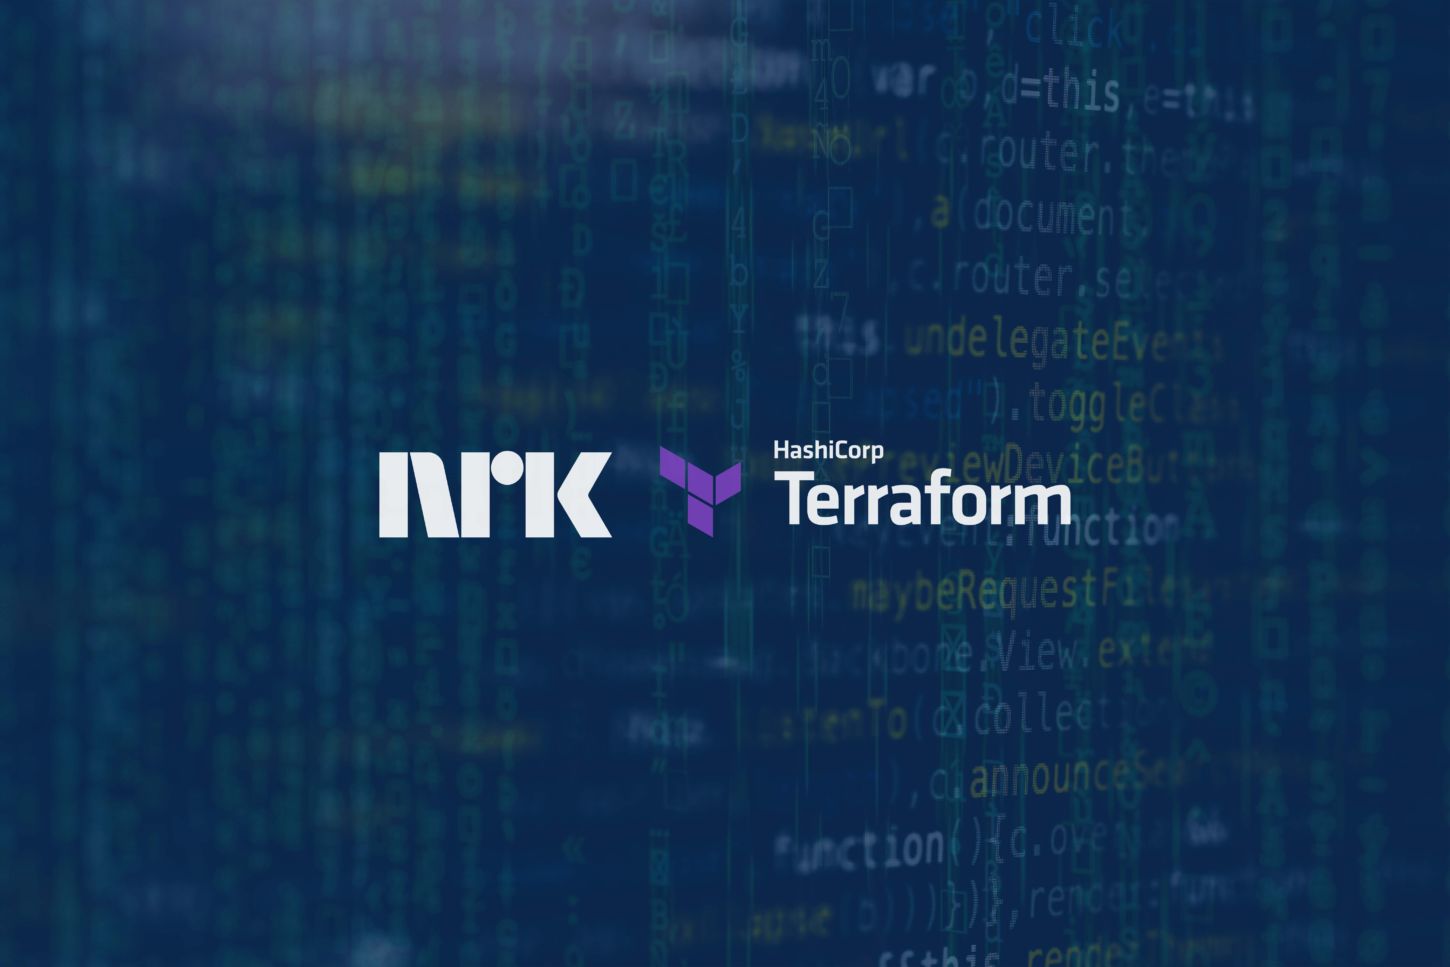 The NRK logo and the Terraform logo side by side.